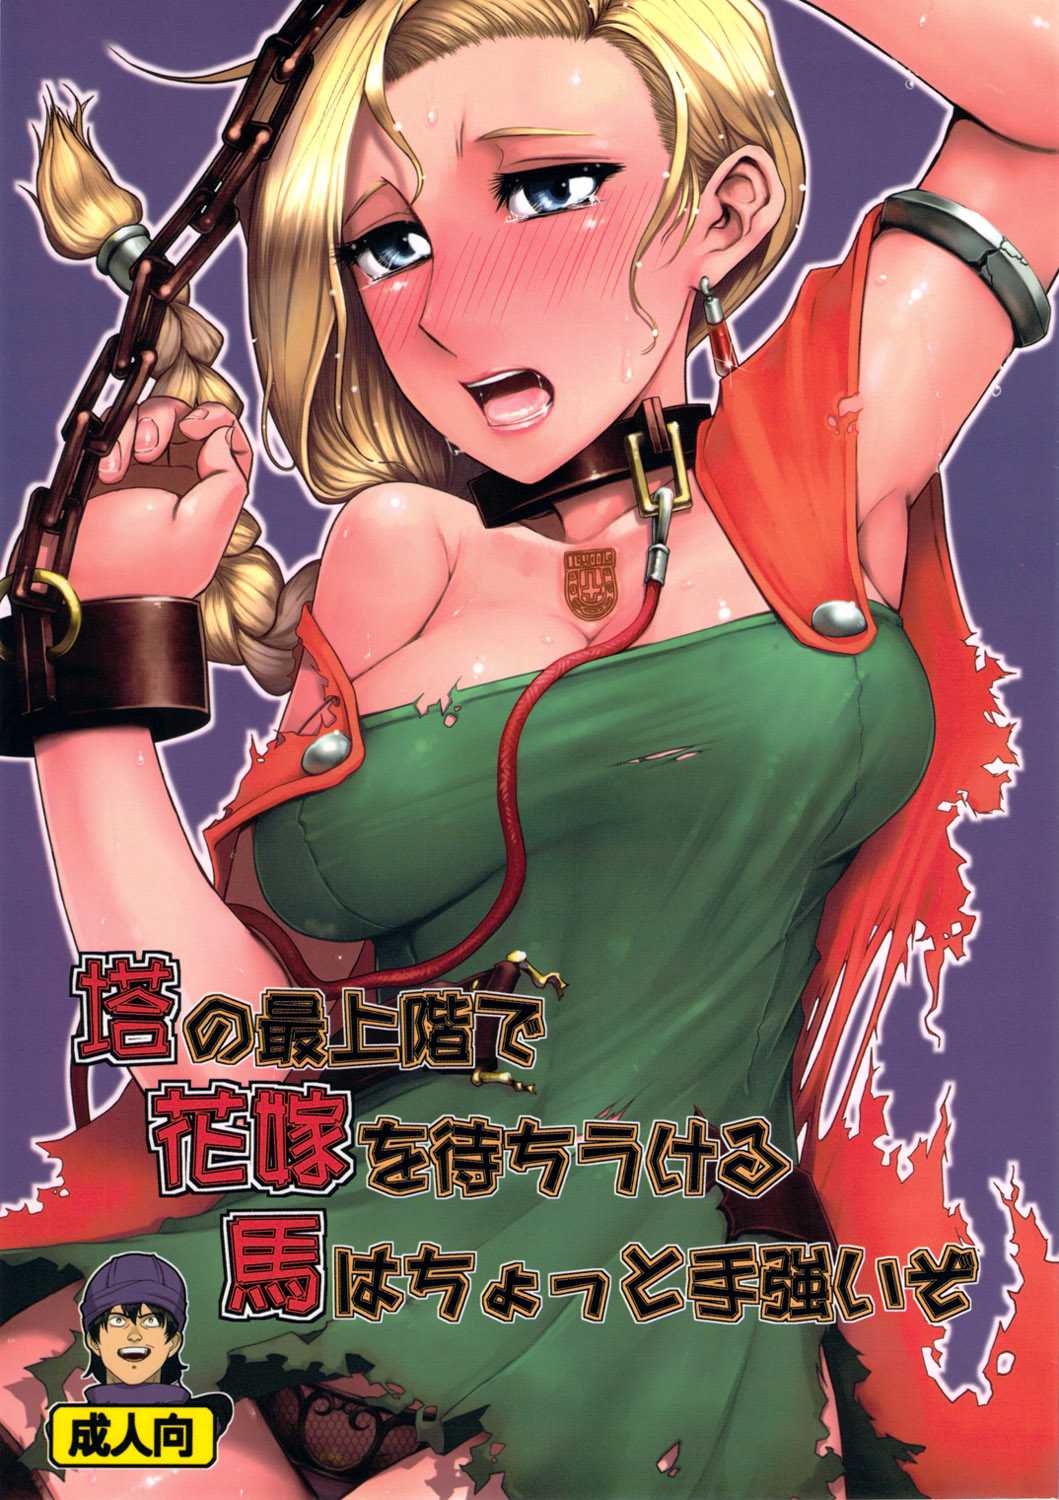 (C81) [A・S・G Group (misonou)] The Horse Waiting with the Bride on the Top Floor of the Tower is Rather Tough (Dragon Quest 5) [English] [LWB Collab] (C81) [A・S・Gグループ(みそのう)] 塔の最上階で花嫁を待ちうける馬はちょっと手強いぞ (ドラゴンクエスト V) [英訳]